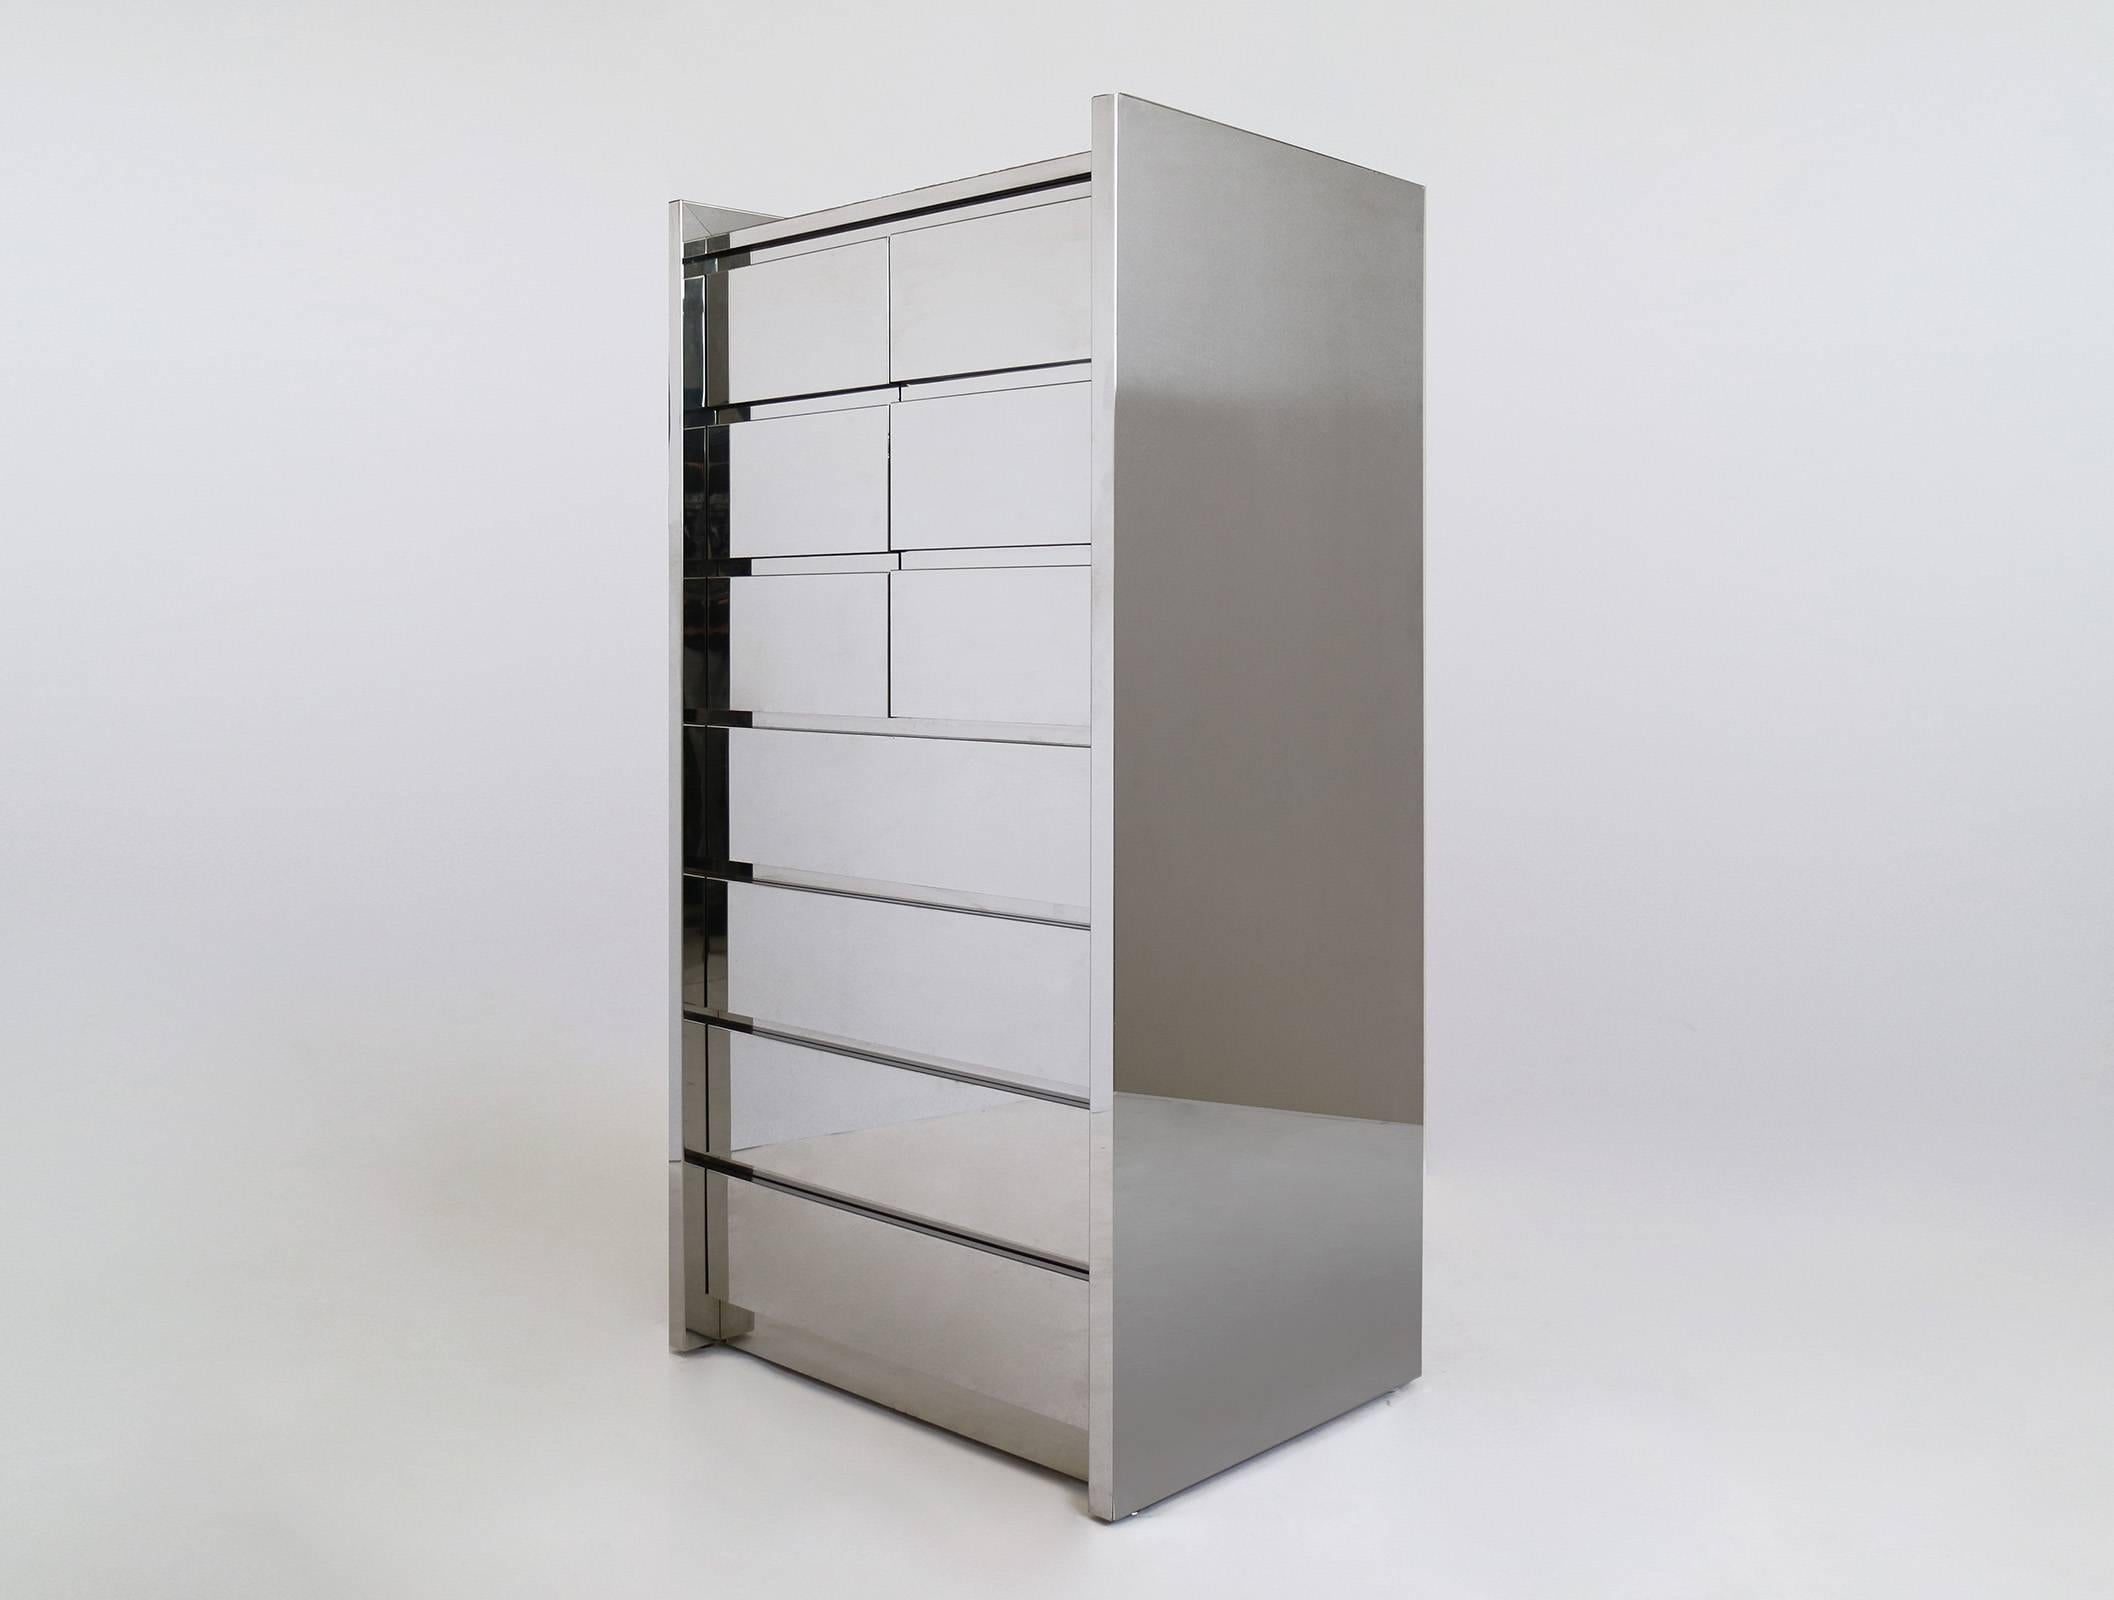 Karl Springer LTD., four drawer case with upper storage compartment, hinged doors, adjustable shelf.
High polished stainless steel with mirror glass surface top.